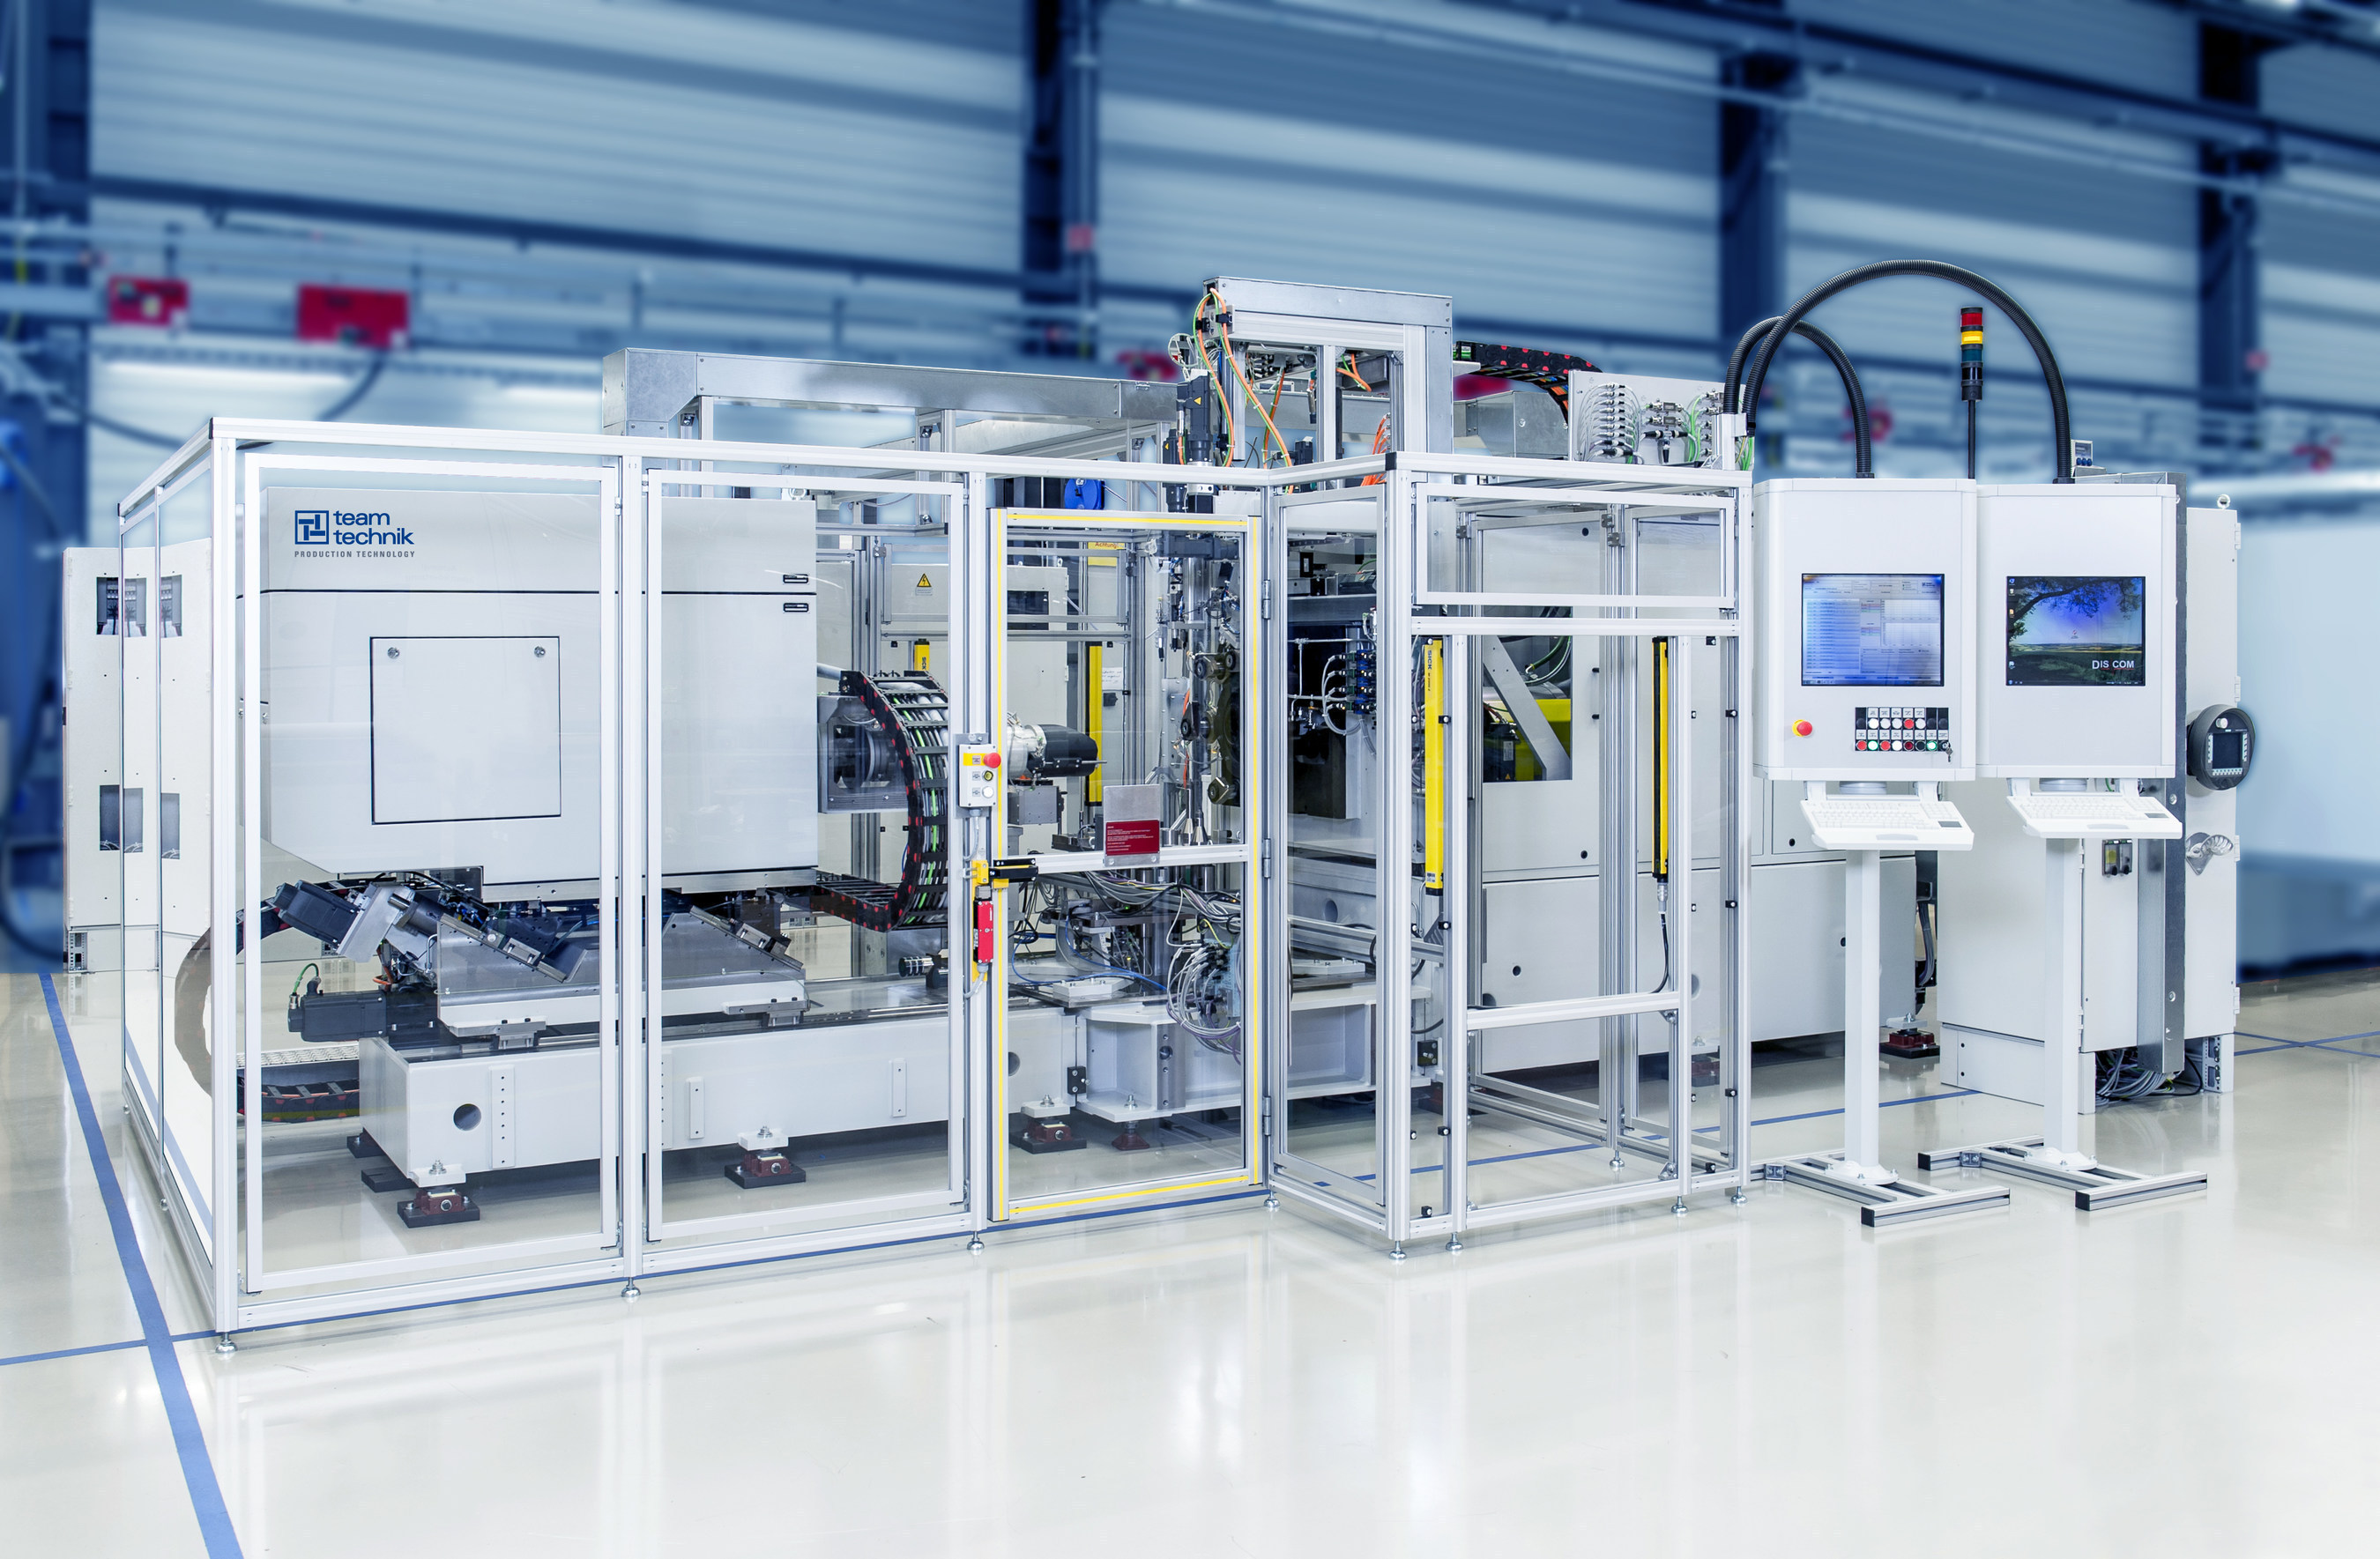 COMPACT DRIVE by teamtechnik: a tried and tested standard test bench with high-tech processes and intelligent test software, quickly available for delivery. Photo: teamtechnik (no fee for printing - notification requested)